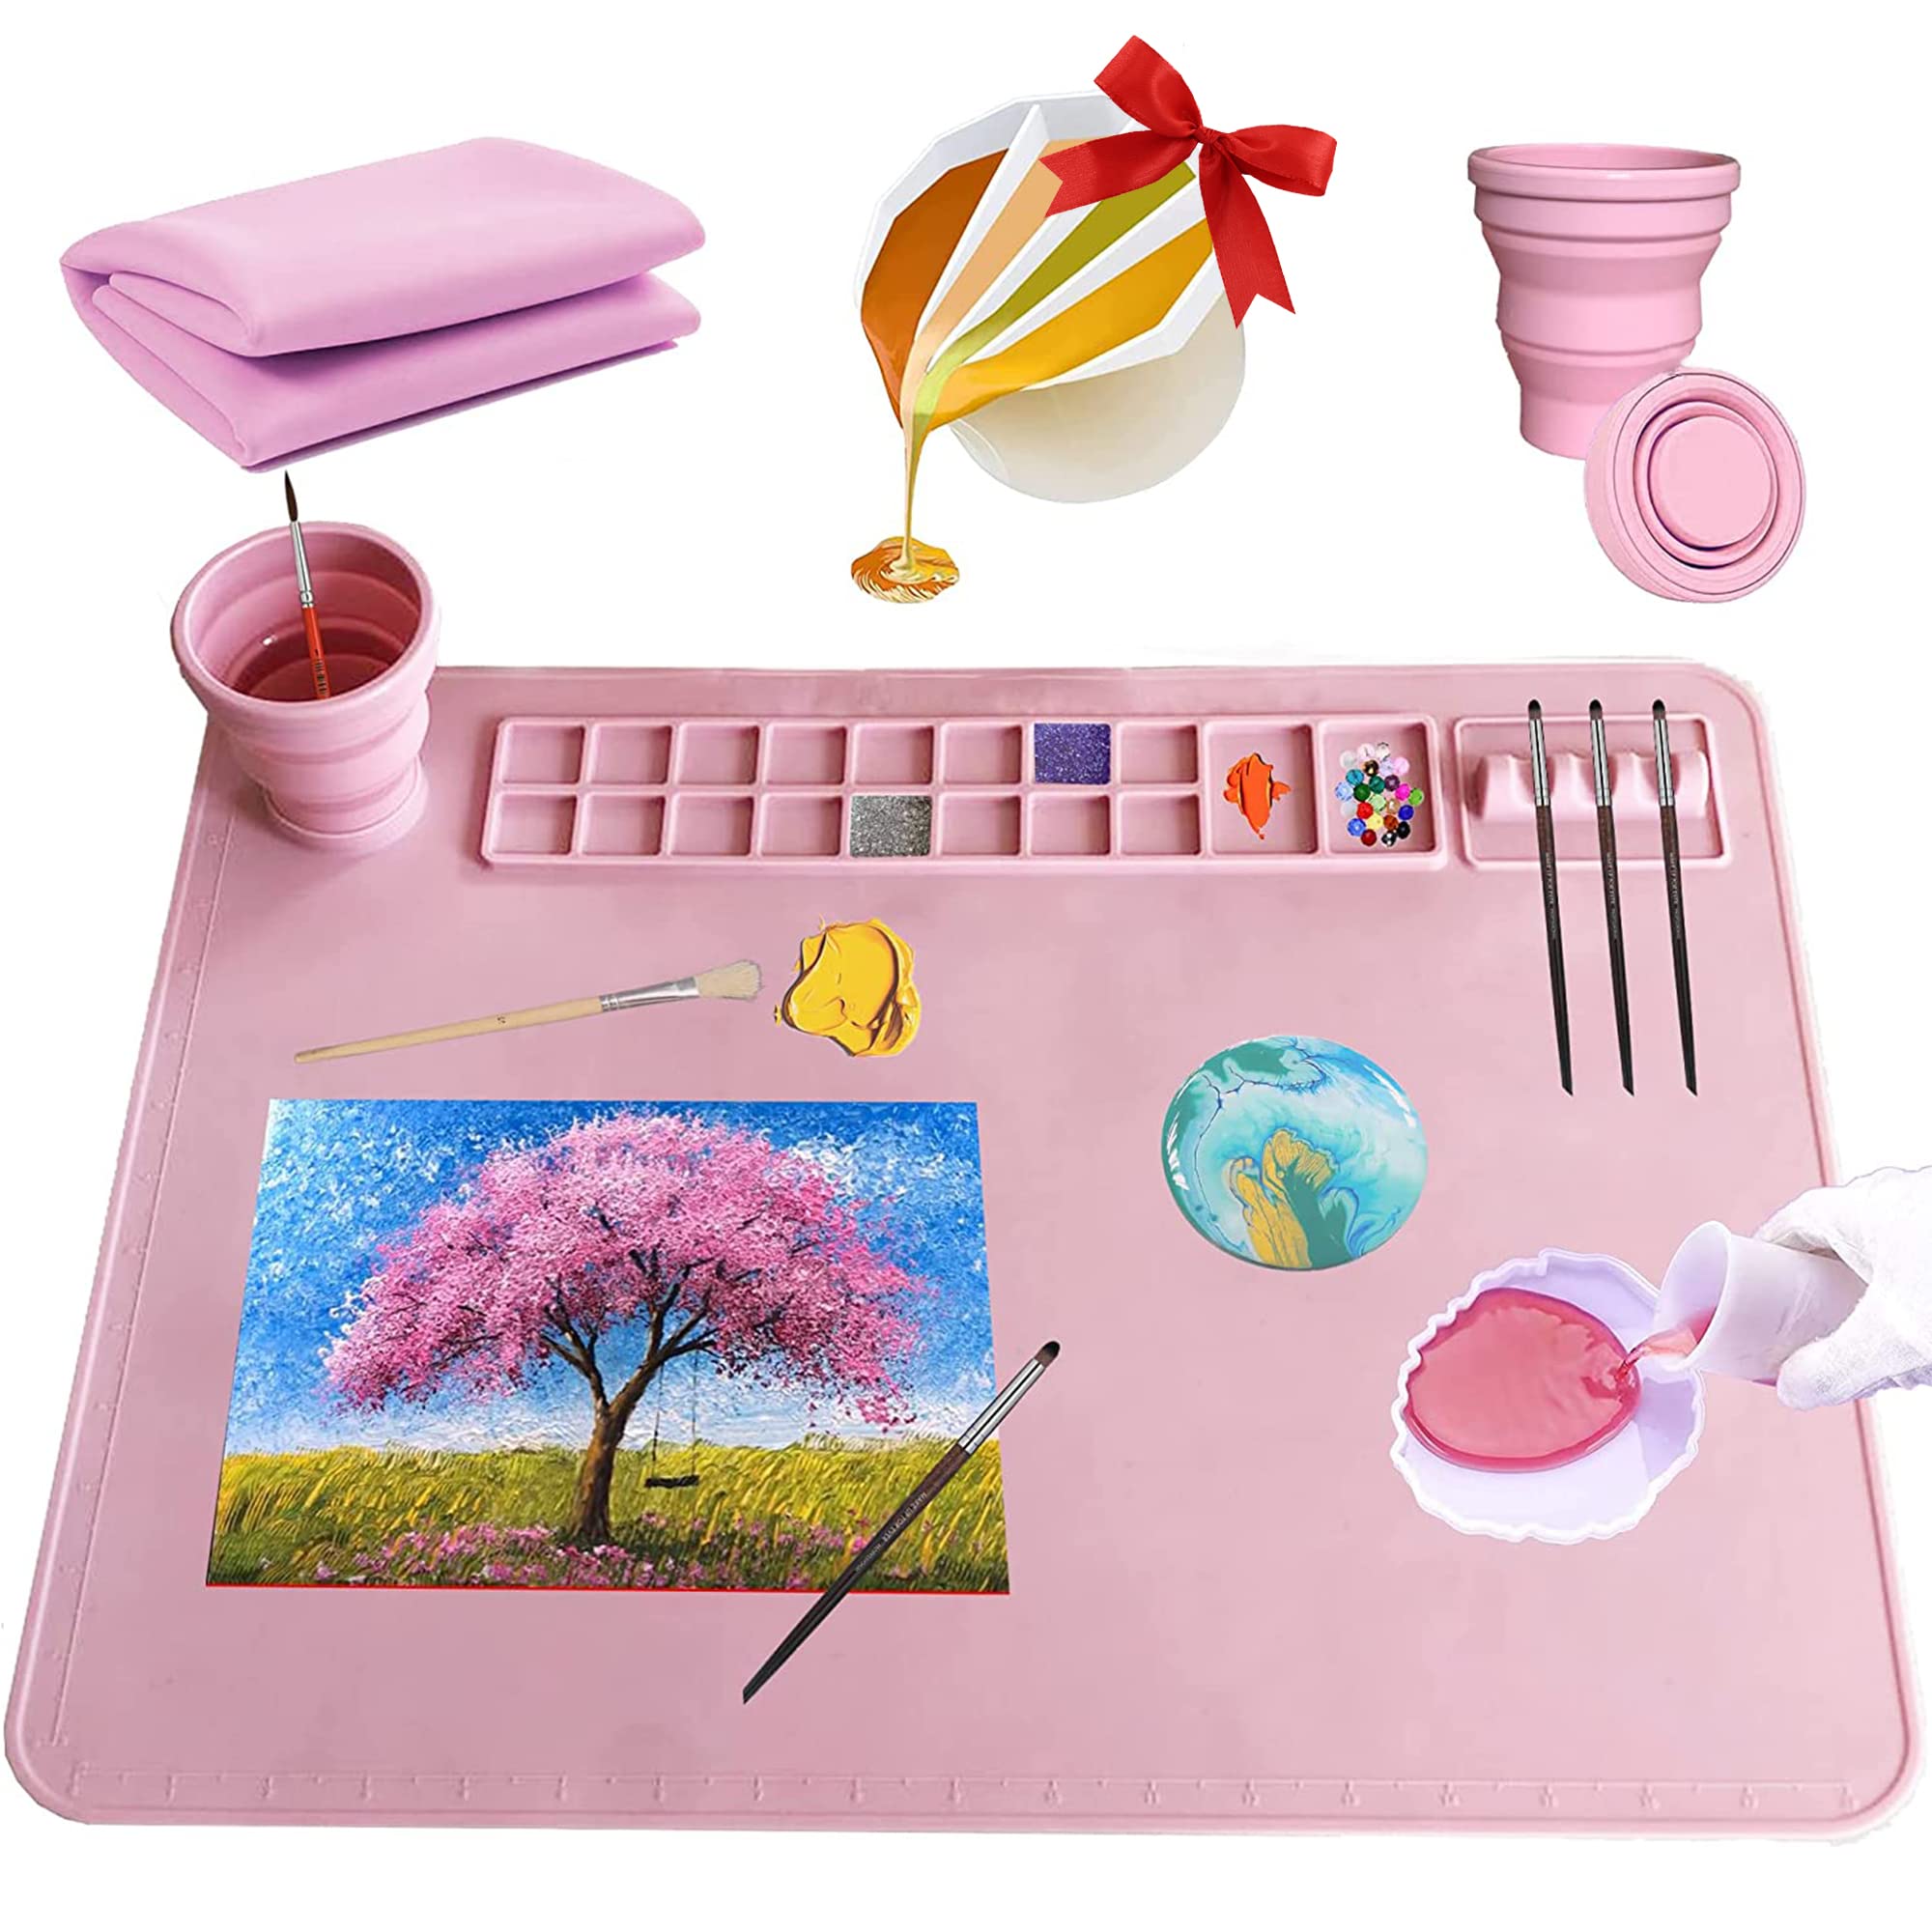 Silicone Painting Mat, 24×16 Silicone Craft Mat with Cup and